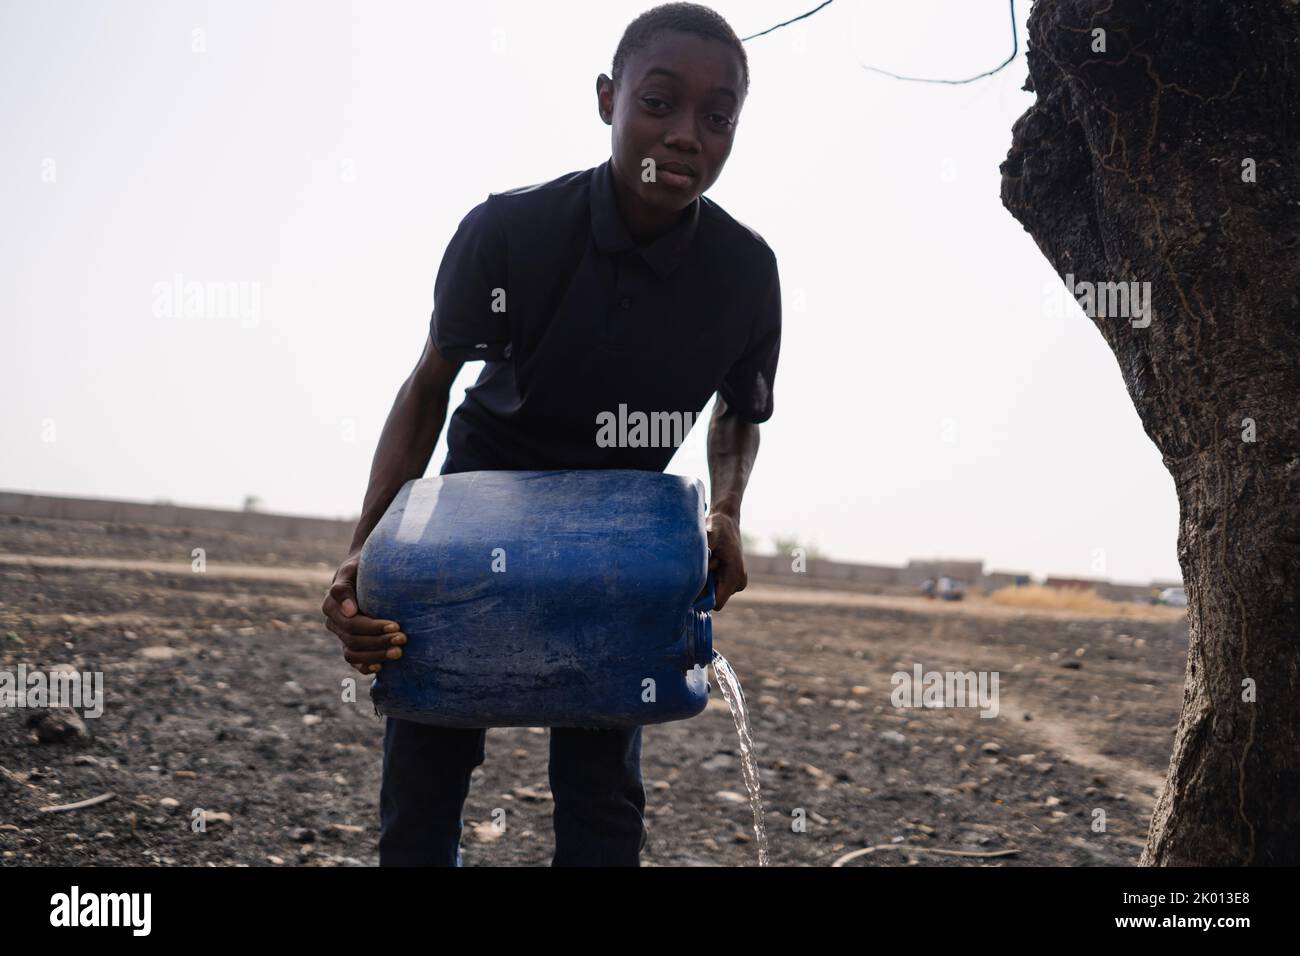 Gloomy and blurry image of a young African man with a can of water, irrigating a dried up field; concept of hopelessness of third world people to cope Stock Photo